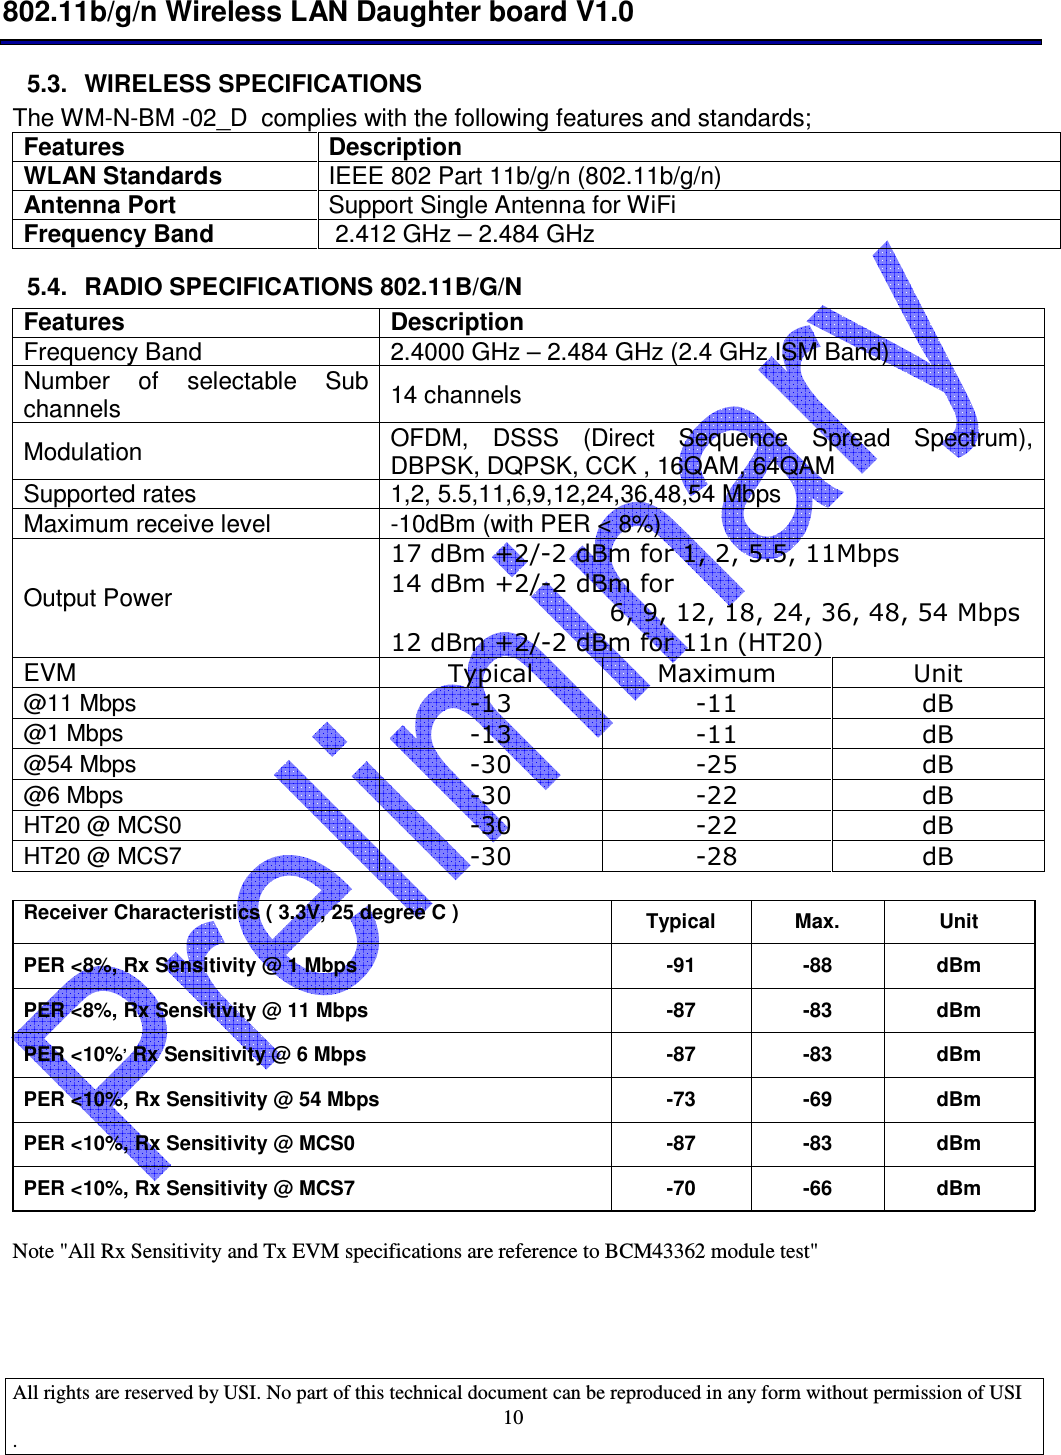  802.11b/g/n Wireless LAN Daughter board V1.0  All rights are reserved by USI. No part of this technical document can be reproduced in any form without permission of USI .                                    105.3.  WIRELESS SPECIFICATIONS The WM-N-BM -02_D  complies with the following features and standards; Features Description WLAN Standards IEEE 802 Part 11b/g/n (802.11b/g/n) Antenna Port Support Single Antenna for WiFi Frequency Band   2.412 GHz – 2.484 GHz  5.4.  RADIO SPECIFICATIONS 802.11B/G/N Features Description Frequency Band  2.4000 GHz – 2.484 GHz (2.4 GHz ISM Band) Number  of  selectable  Sub channels  14 channels  Modulation  OFDM,  DSSS  (Direct  Sequence  Spread  Spectrum), DBPSK, DQPSK, CCK , 16QAM, 64QAM Supported rates  1,2, 5.5,11,6,9,12,24,36,48,54 Mbps Maximum receive level  -10dBm (with PER &lt; 8%) Output Power 17 dBm +2/-2 dBm for 1, 2, 5.5, 11Mbps 14 dBm +2/-2 dBm for  6, 9, 12, 18, 24, 36, 48, 54 Mbps 12 dBm +2/-2 dBm for 11n (HT20) EVM Typical Maximum Unit @11 Mbps -13 -11 dB @1 Mbps -13 -11 dB @54 Mbps -30 -25 dB @6 Mbps -30 -22 dB HT20 @ MCS0 -30 -22 dB HT20 @ MCS7 -30 -28 dB  Receiver Characteristics ( 3.3V, 25 degree C )  Typical  Max.  Unit PER &lt;8%, Rx Sensitivity @ 1 Mbps  -91  -88  dBm PER &lt;8%, Rx Sensitivity @ 11 Mbps  -87  -83  dBm PER &lt;10%, Rx Sensitivity @ 6 Mbps  -87  -83  dBm PER &lt;10%, Rx Sensitivity @ 54 Mbps  -73  -69  dBm PER &lt;10%, Rx Sensitivity @ MCS0  -87  -83  dBm PER &lt;10%, Rx Sensitivity @ MCS7  -70  -66  dBm  Note &quot;All Rx Sensitivity and Tx EVM specifications are reference to BCM43362 module test&quot;   